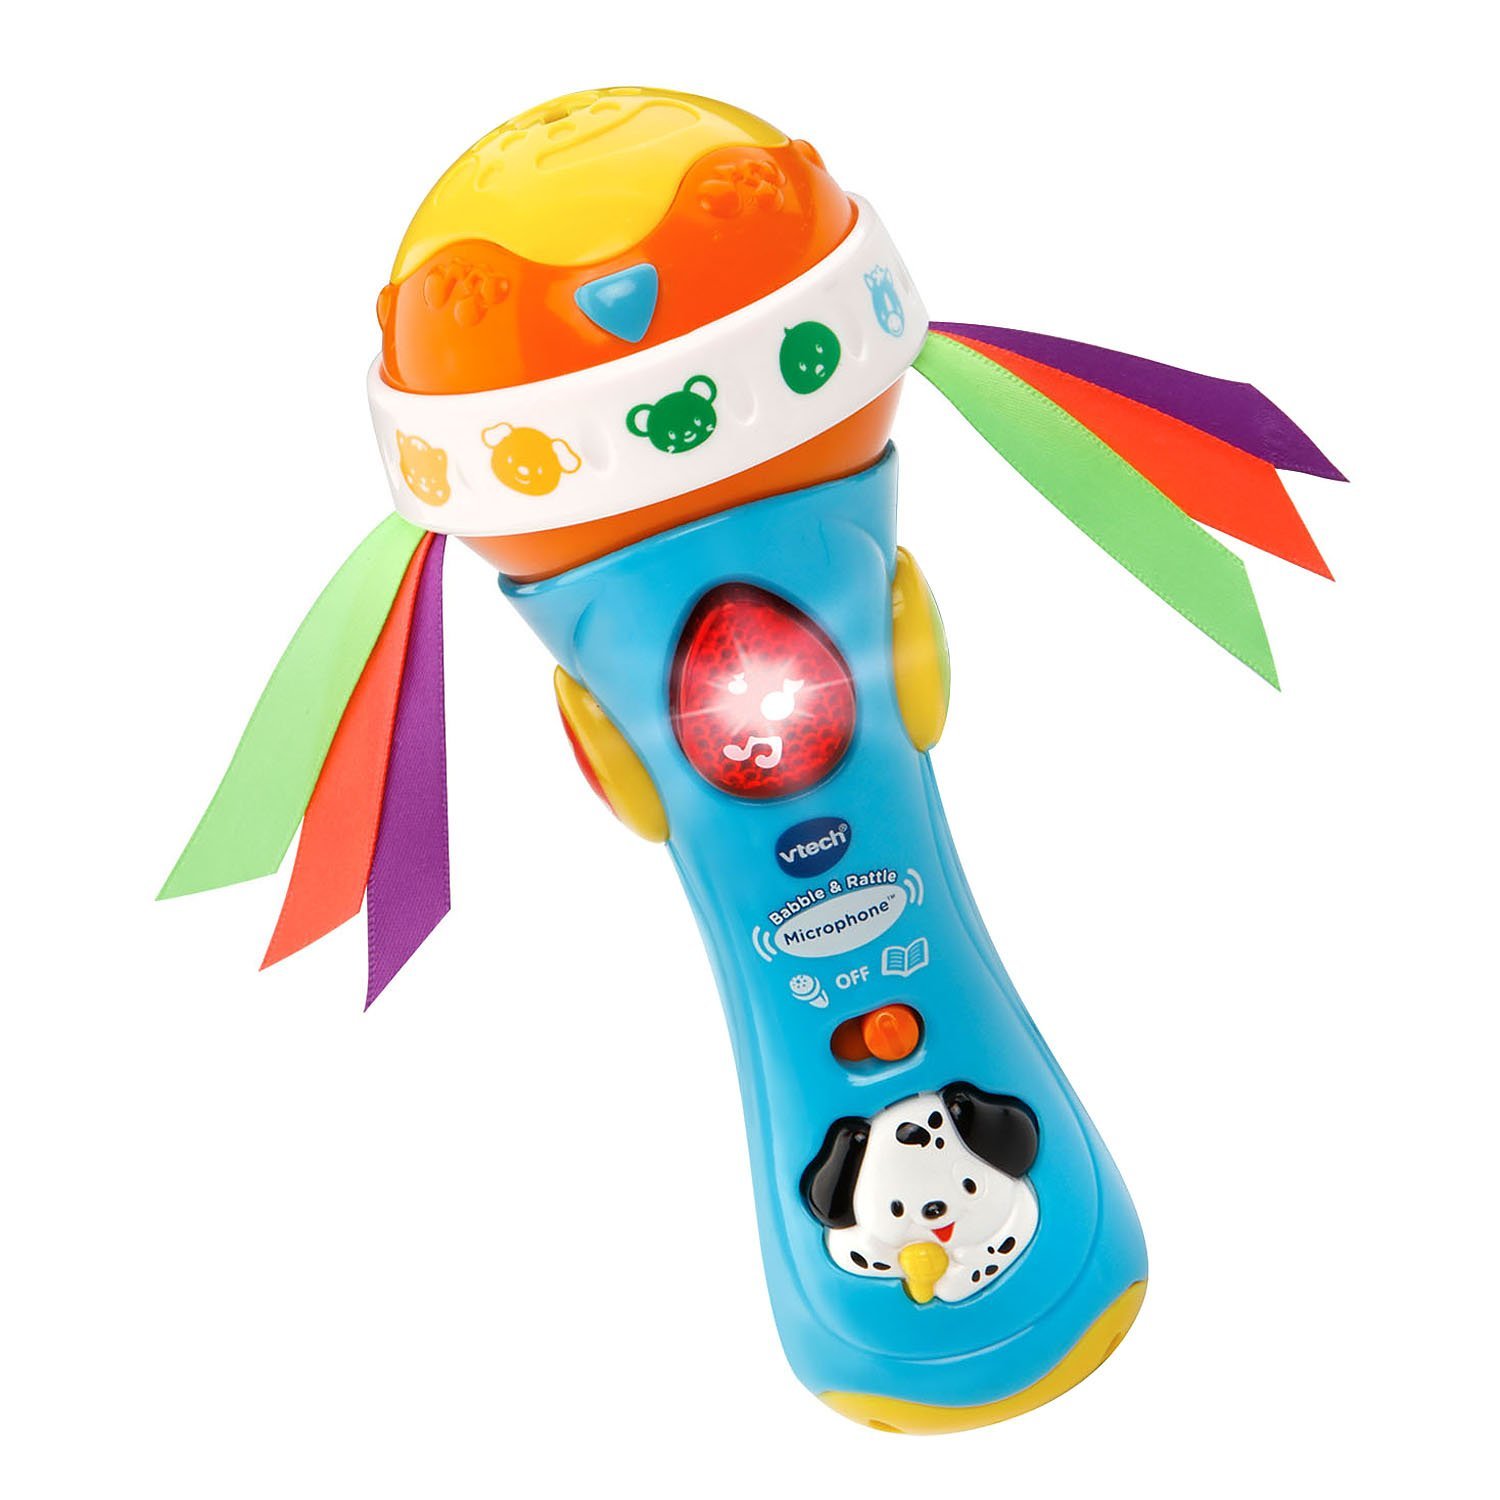 VTech Baby Babble and Rattle Microphone, Blue - $29.99